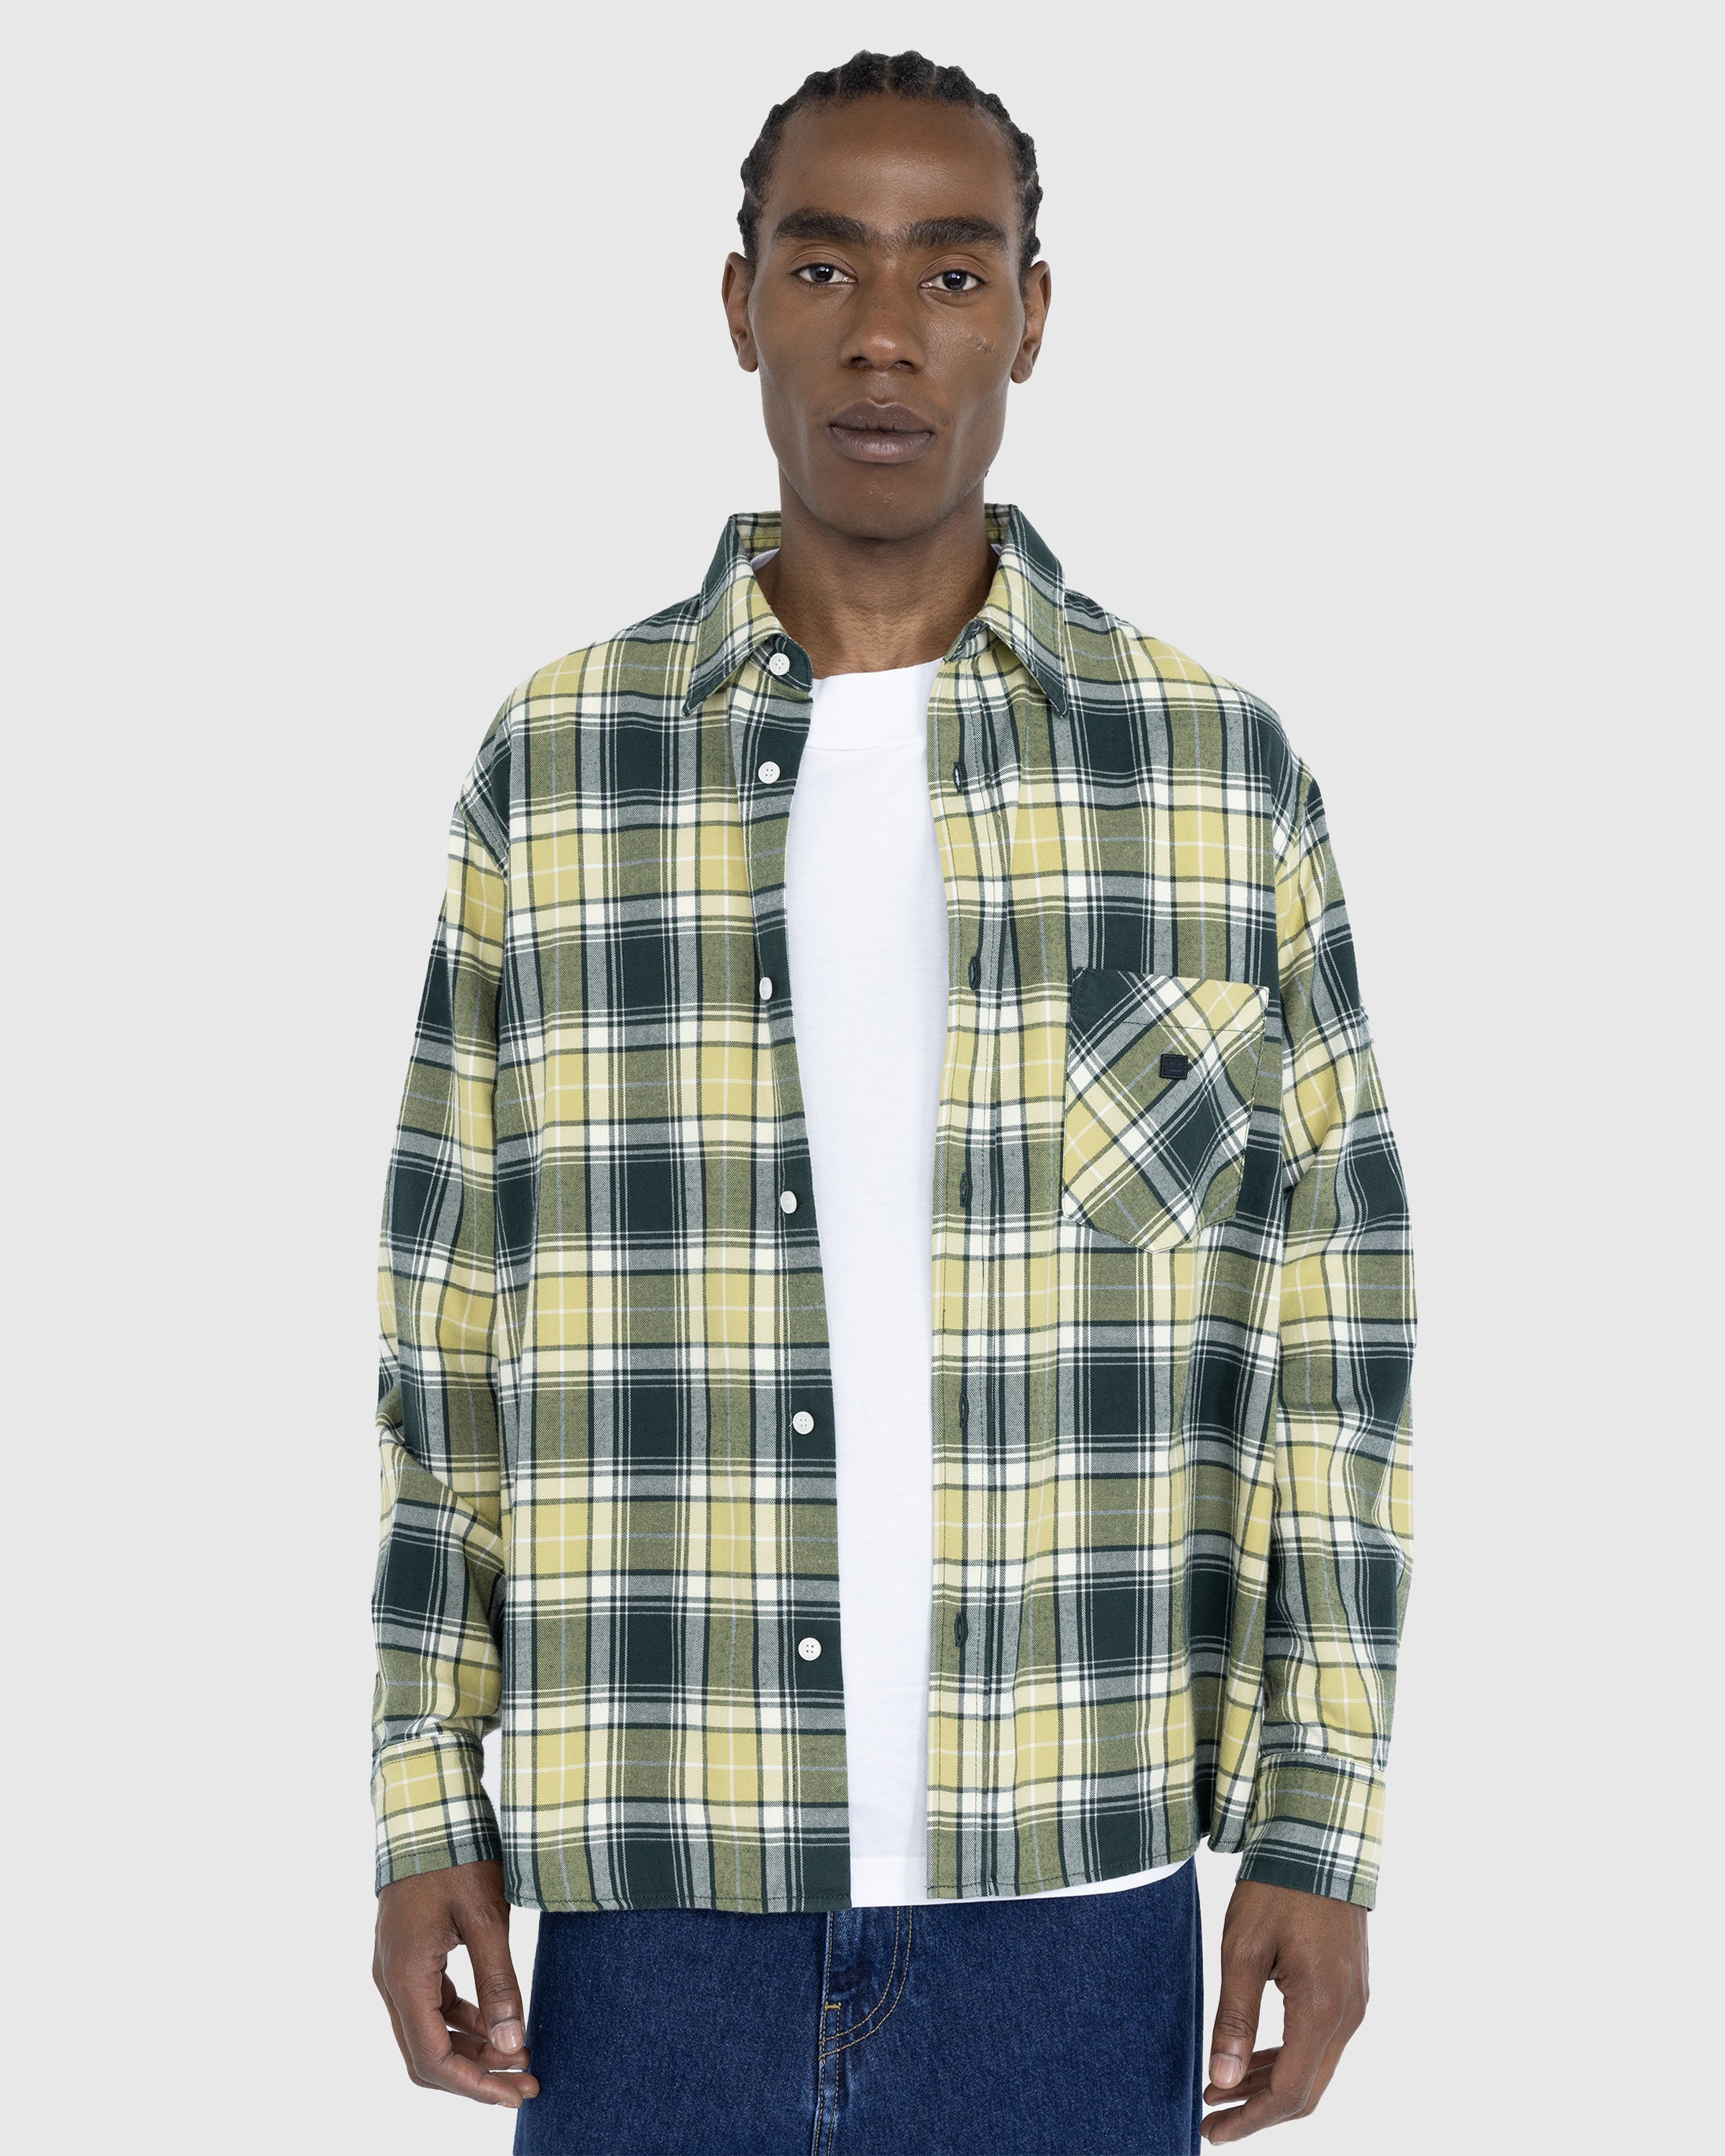 Acne Studios - Check Button-Up Shirt Forest Green/Light Green - Clothing - Green - Image 2